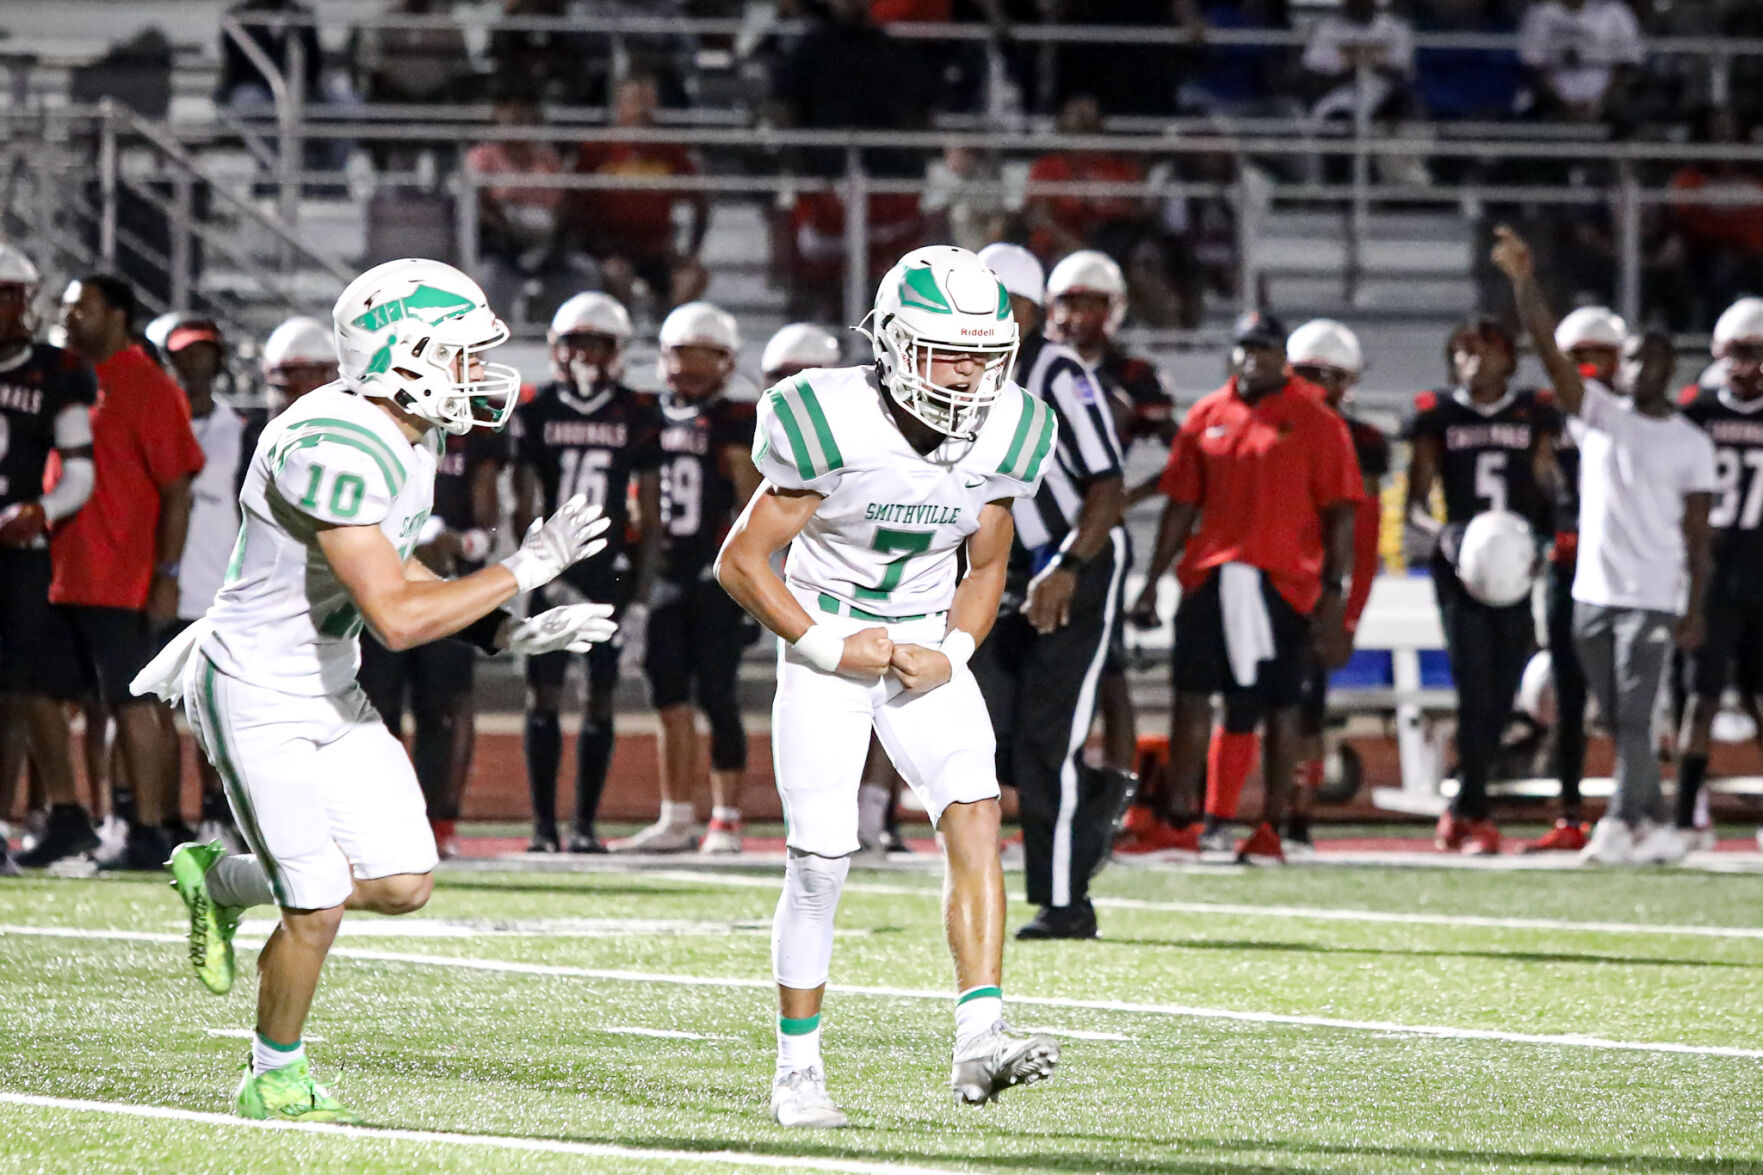 Smithville Warriors Dominate Raytown South in 28-12 Victory